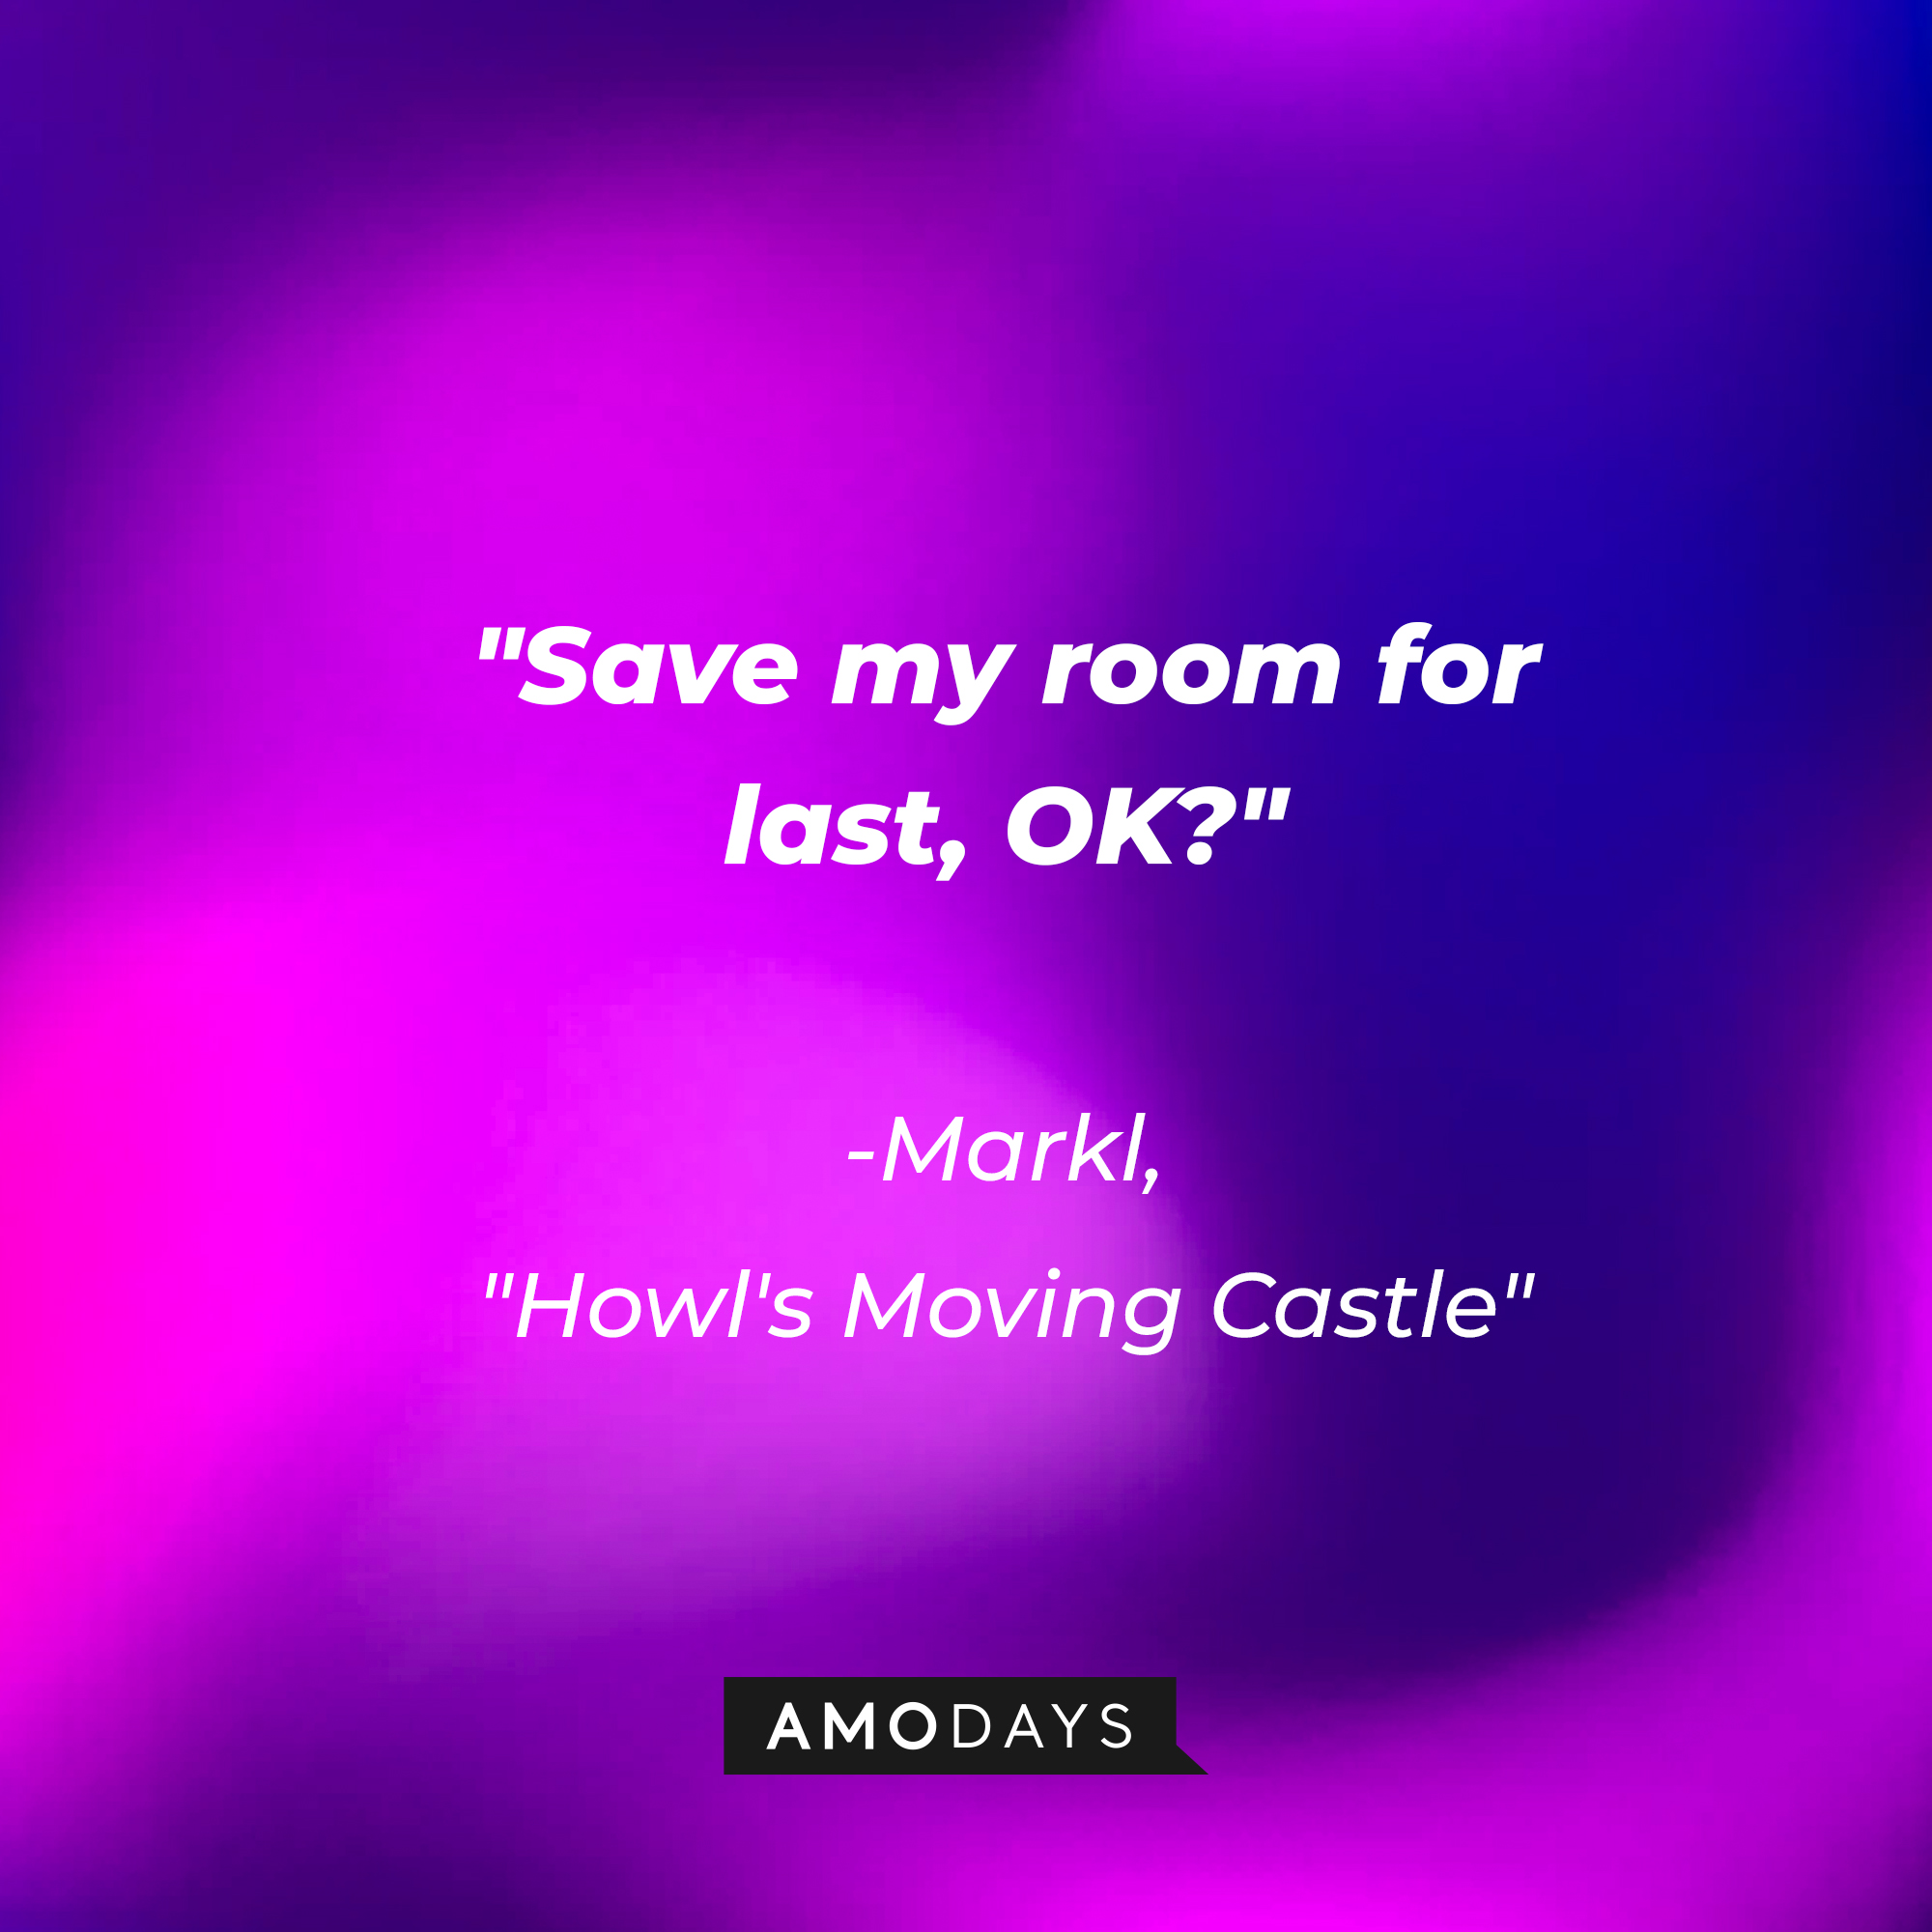 Markl's quote in "Howl's Moving Castle:" "Save my room for last, OK?" | Source: AmoDays